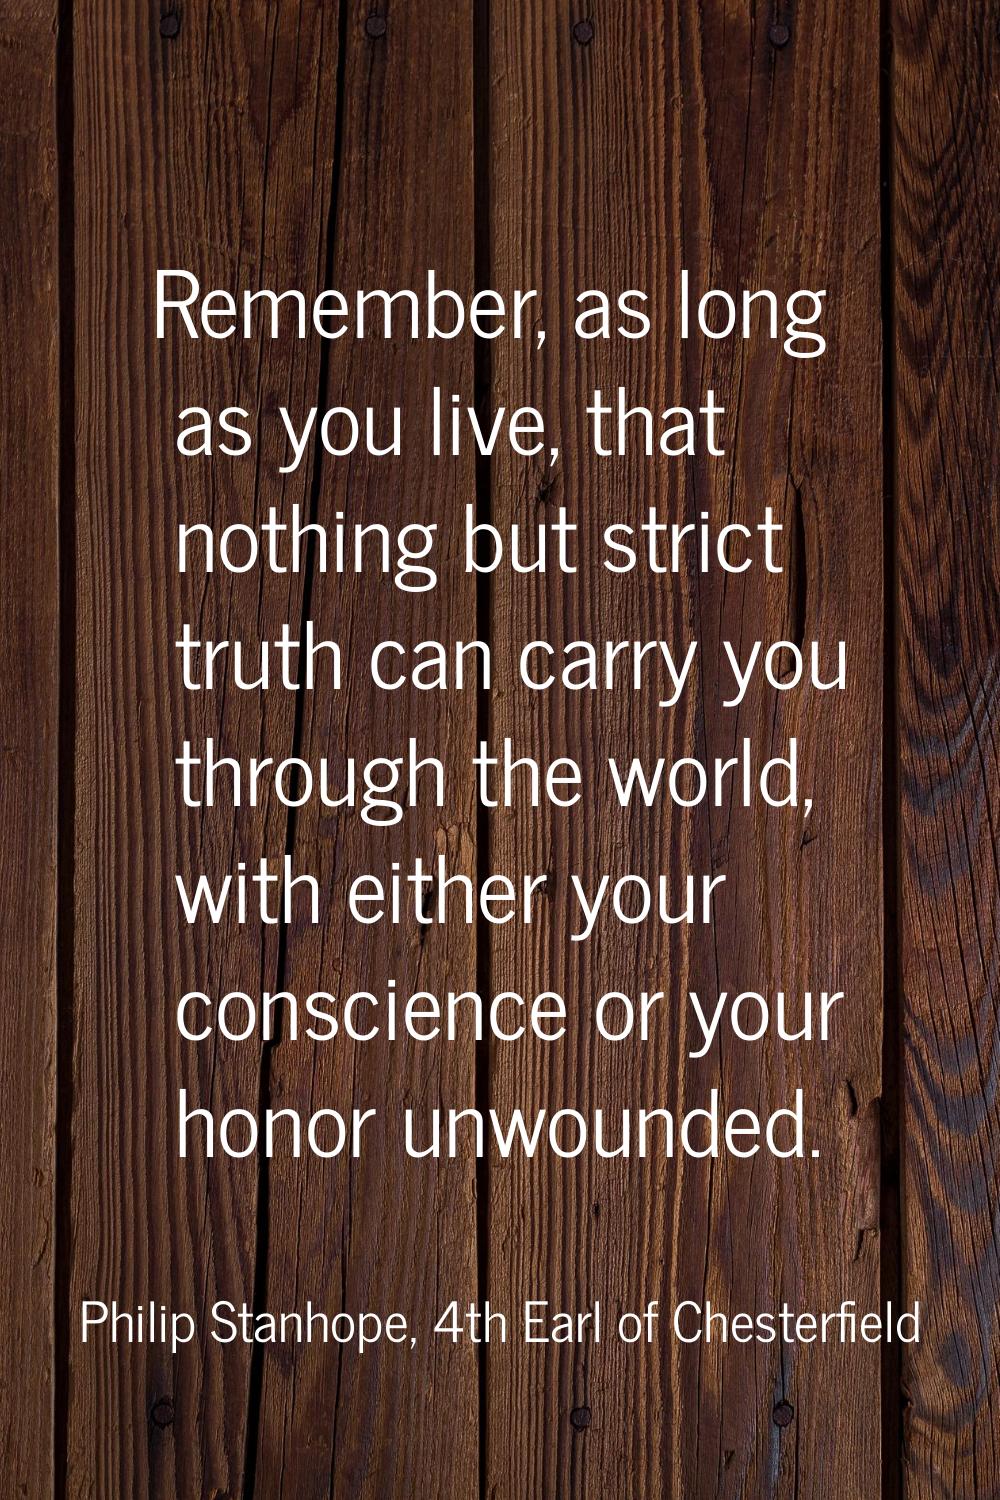 Remember, as long as you live, that nothing but strict truth can carry you through the world, with 